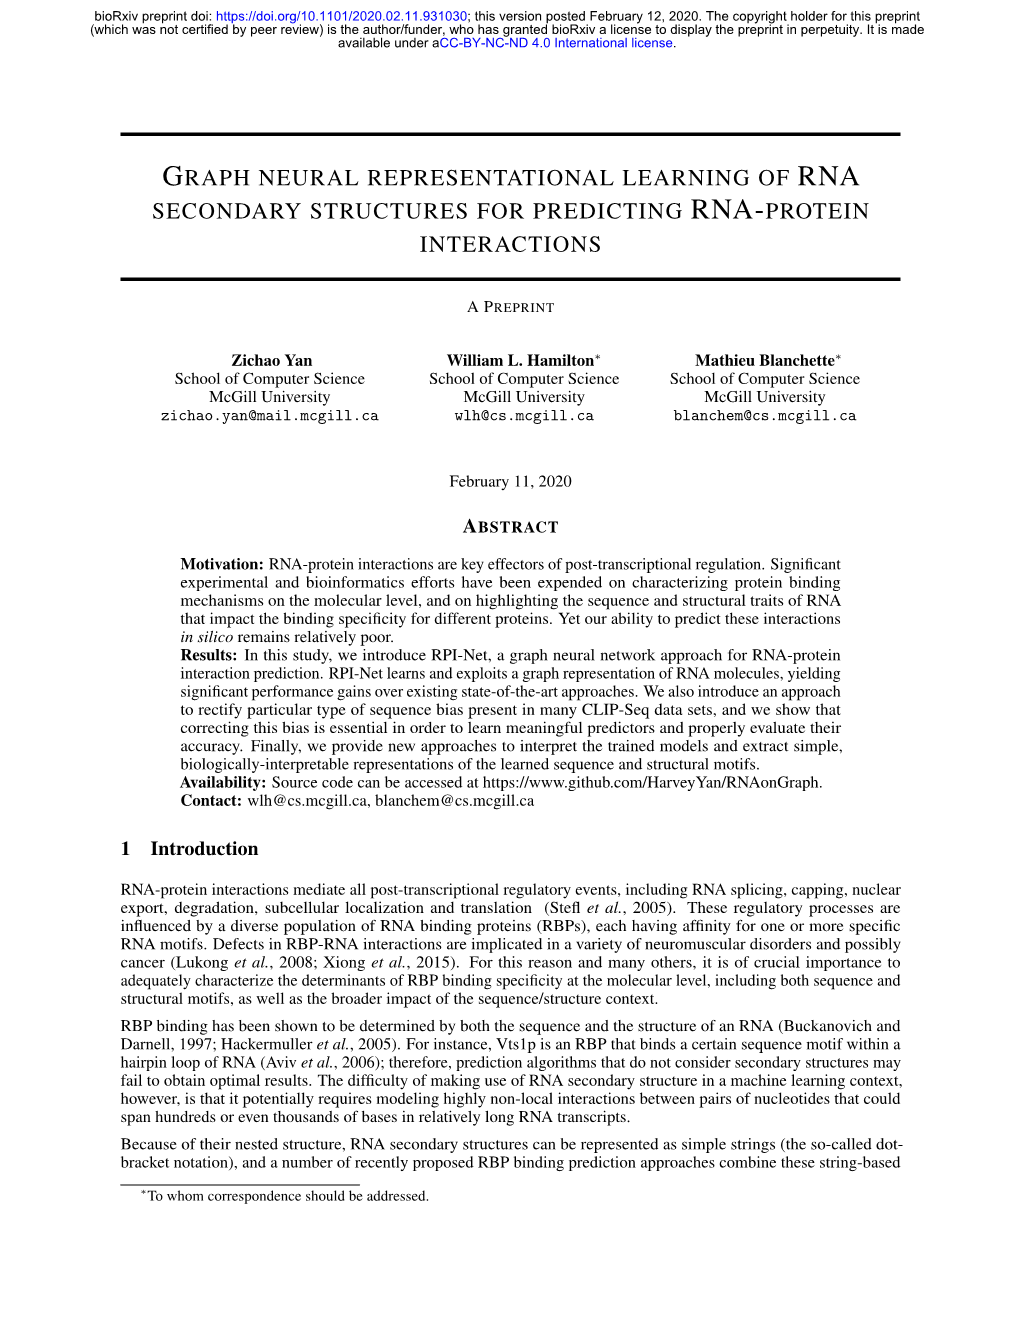 Graph Neural Representational Learning of Rna Secondary Structures for Predicting Rna-Protein Interactions